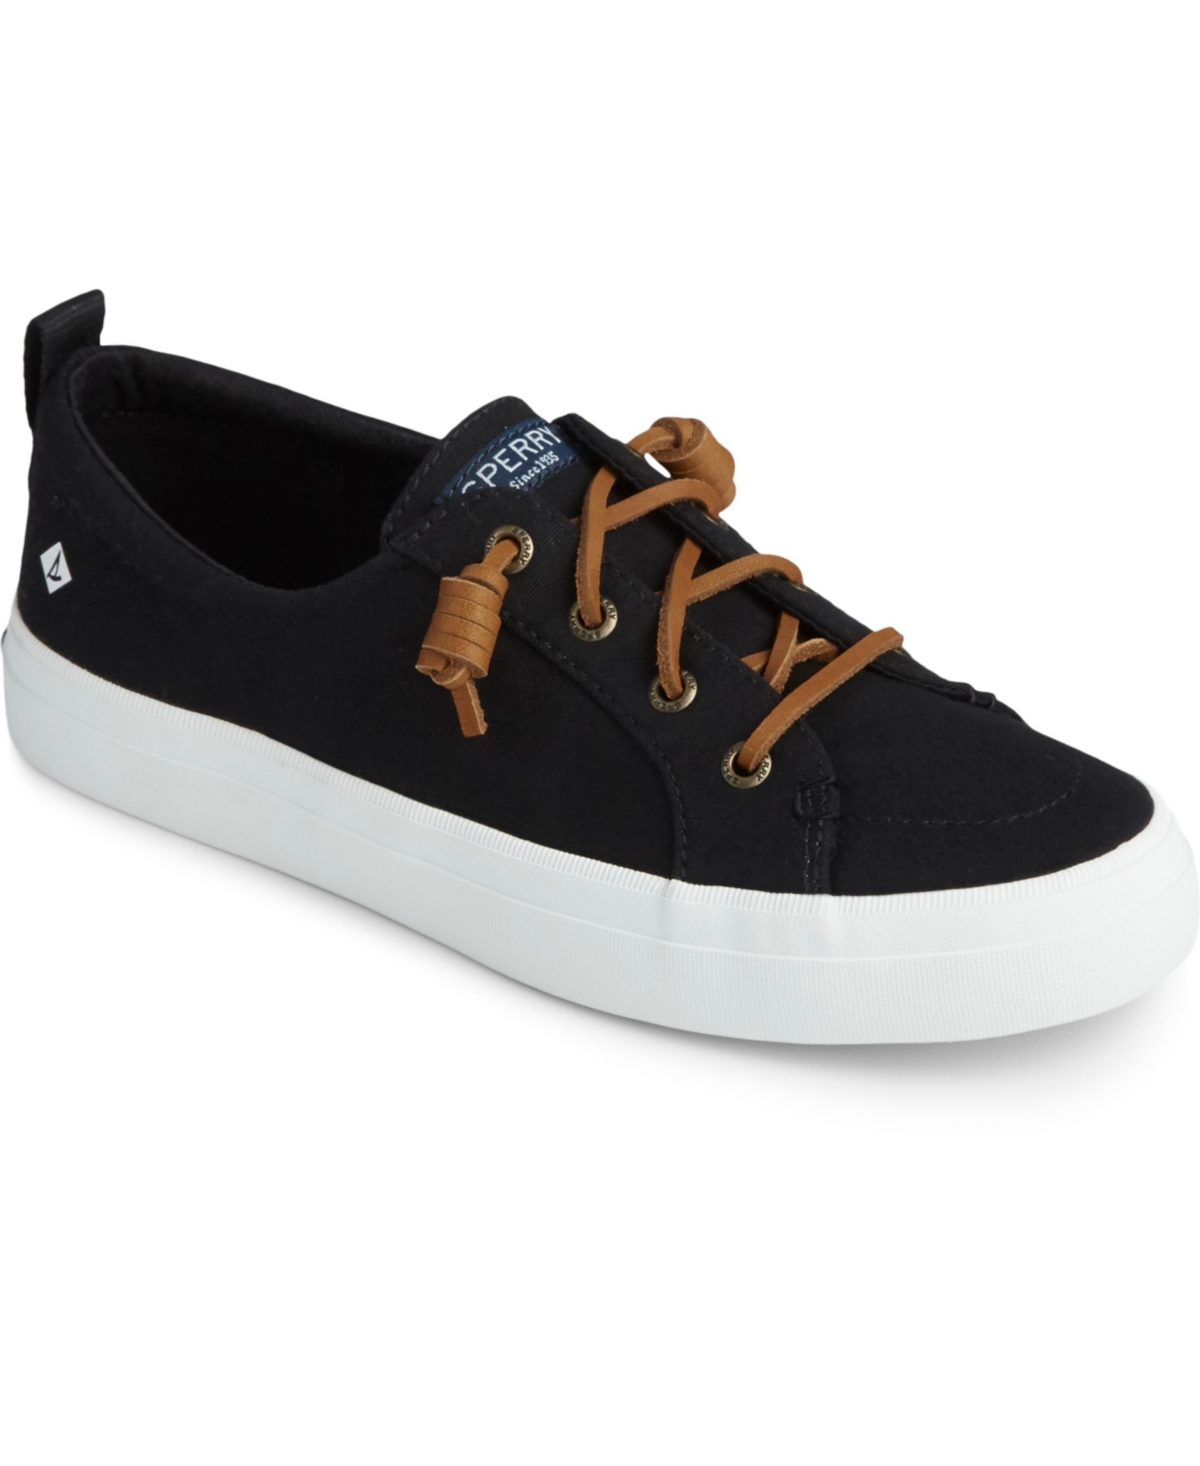 Women's Crest Vibe Canvas Sneakers, Created for Macy's - Oat